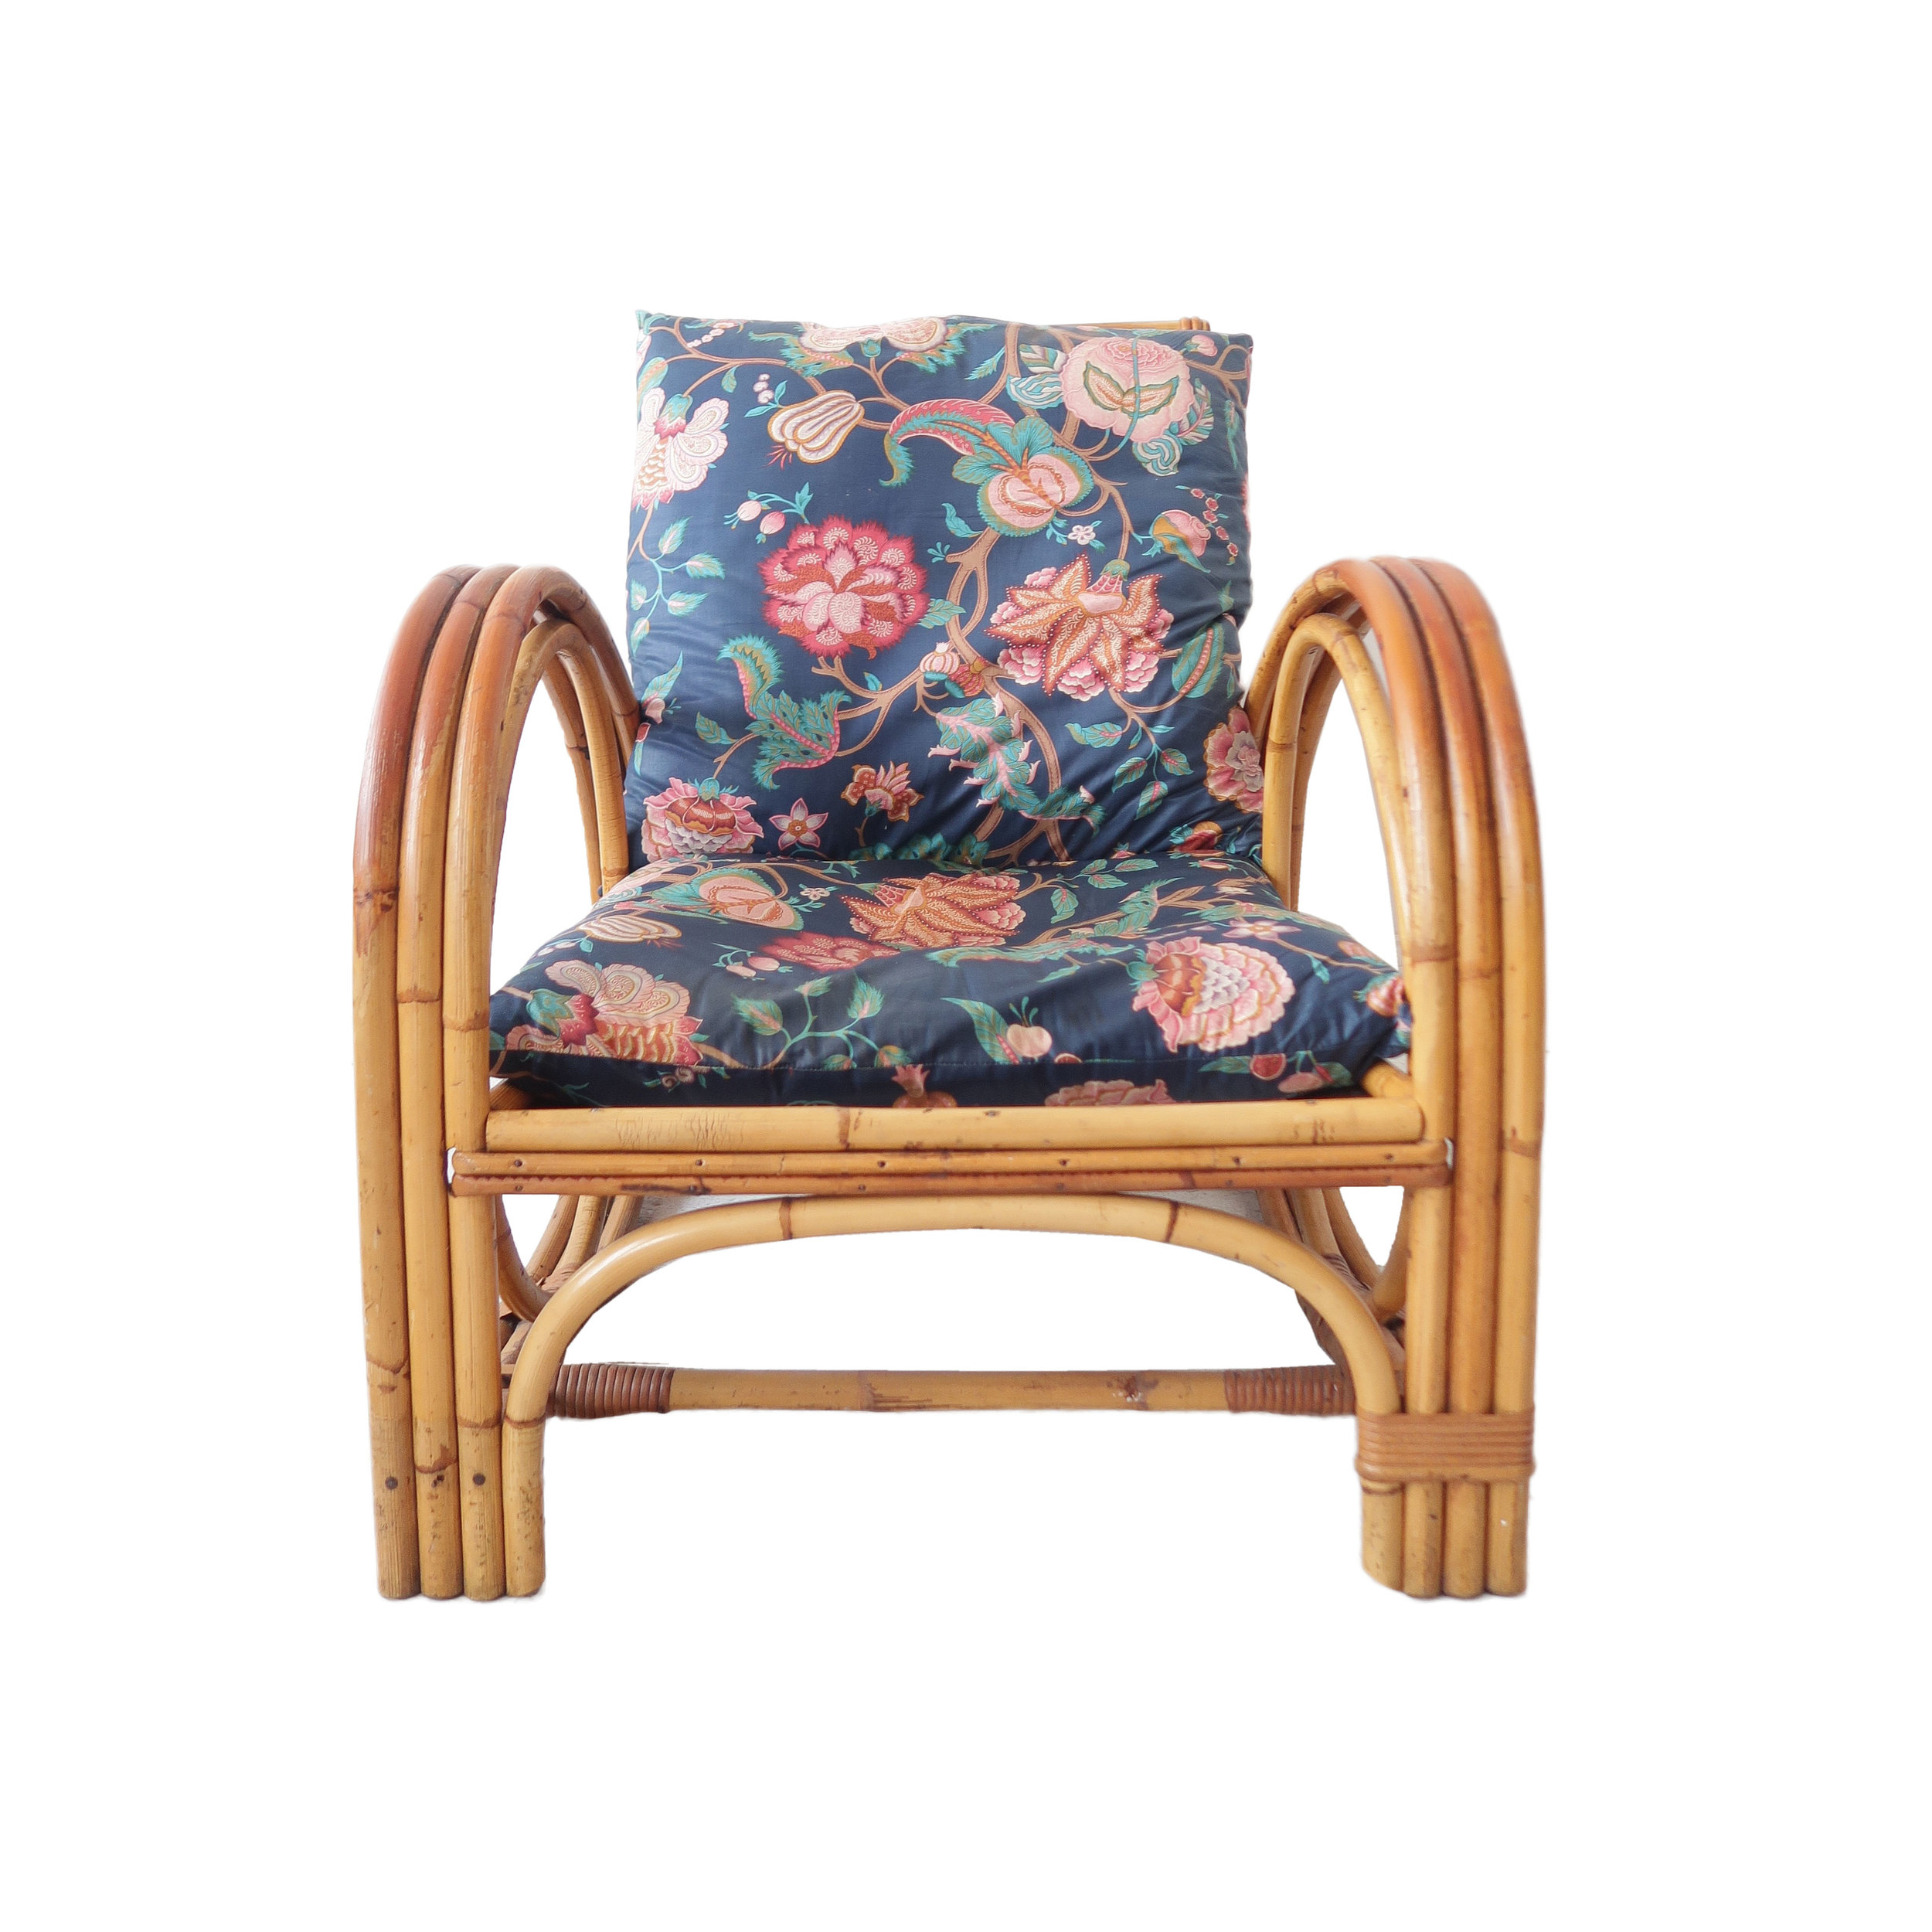 vintage bamboo outdoor chair.jpg